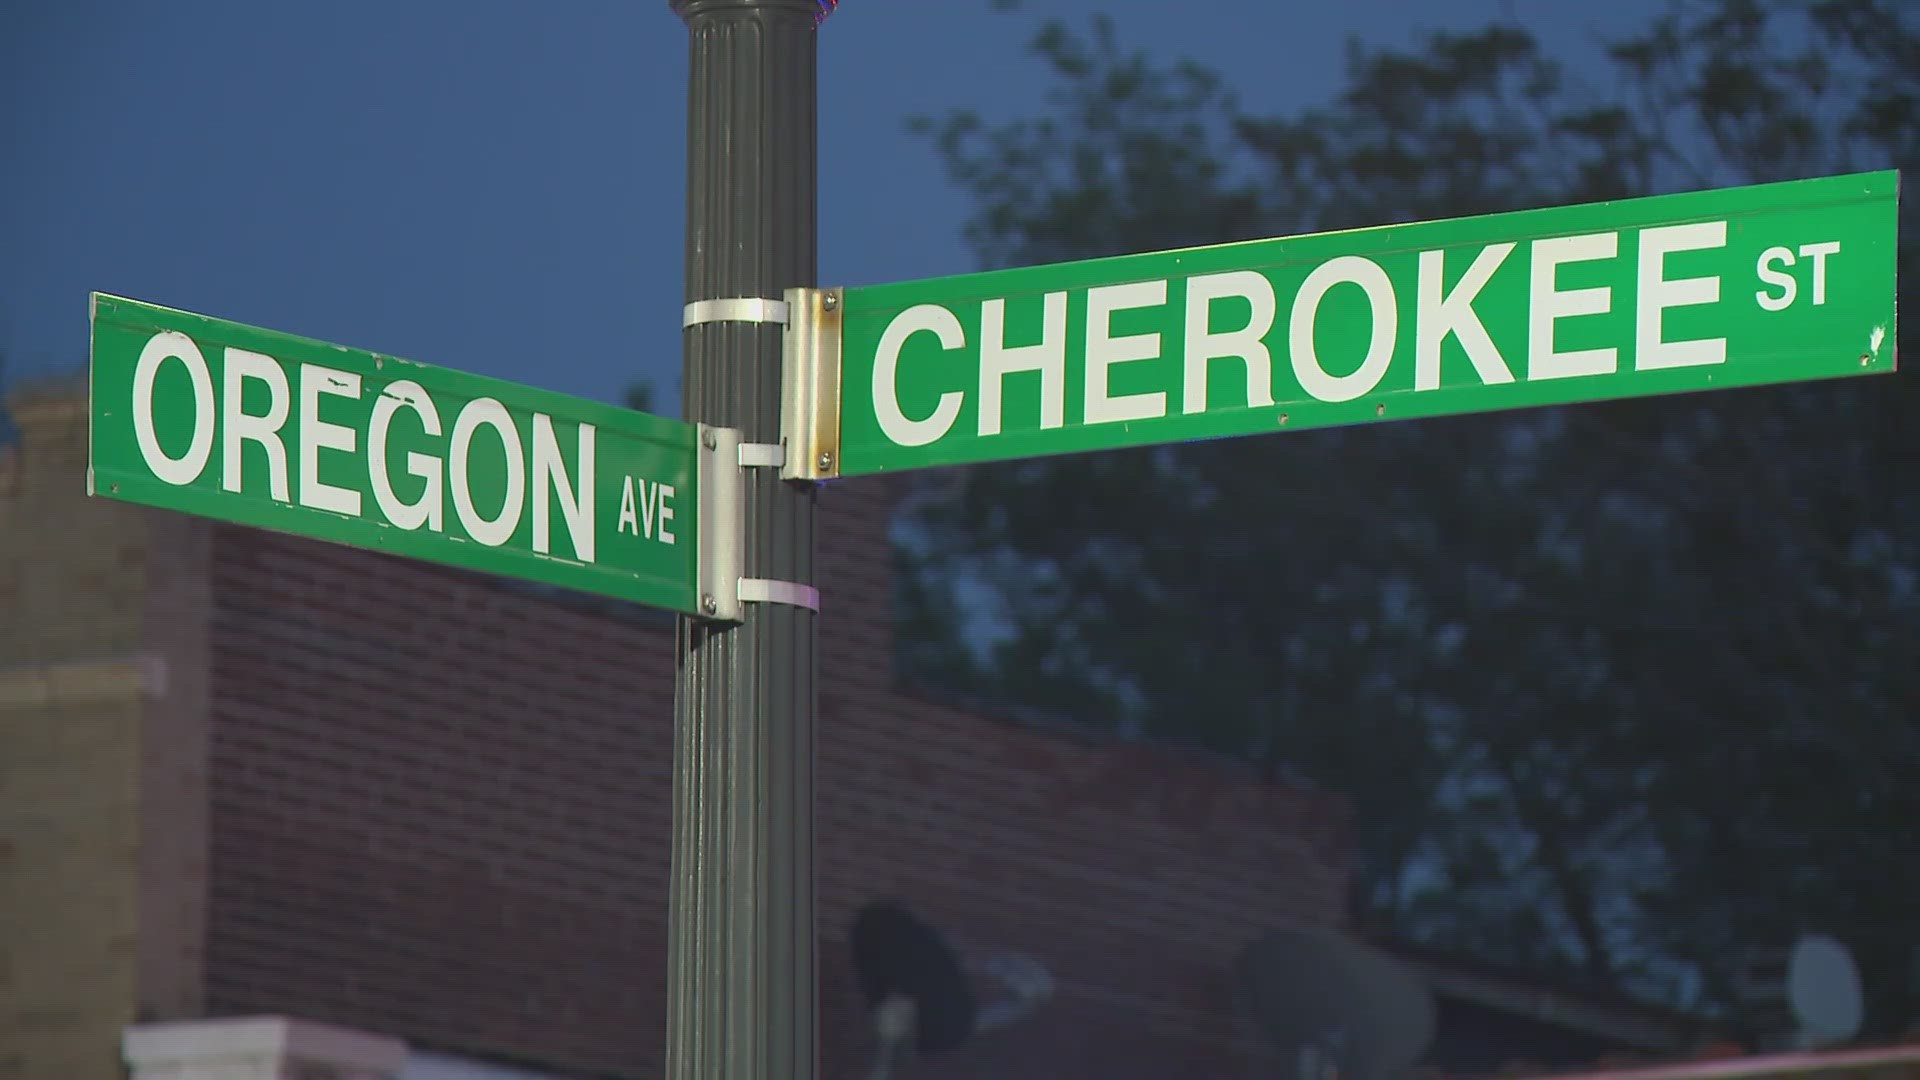 This is the second shooting in the area of the Cinco De Mayo Cherokee Street Festival in two days. Friday's shooting killed 2 and injured 2 others.